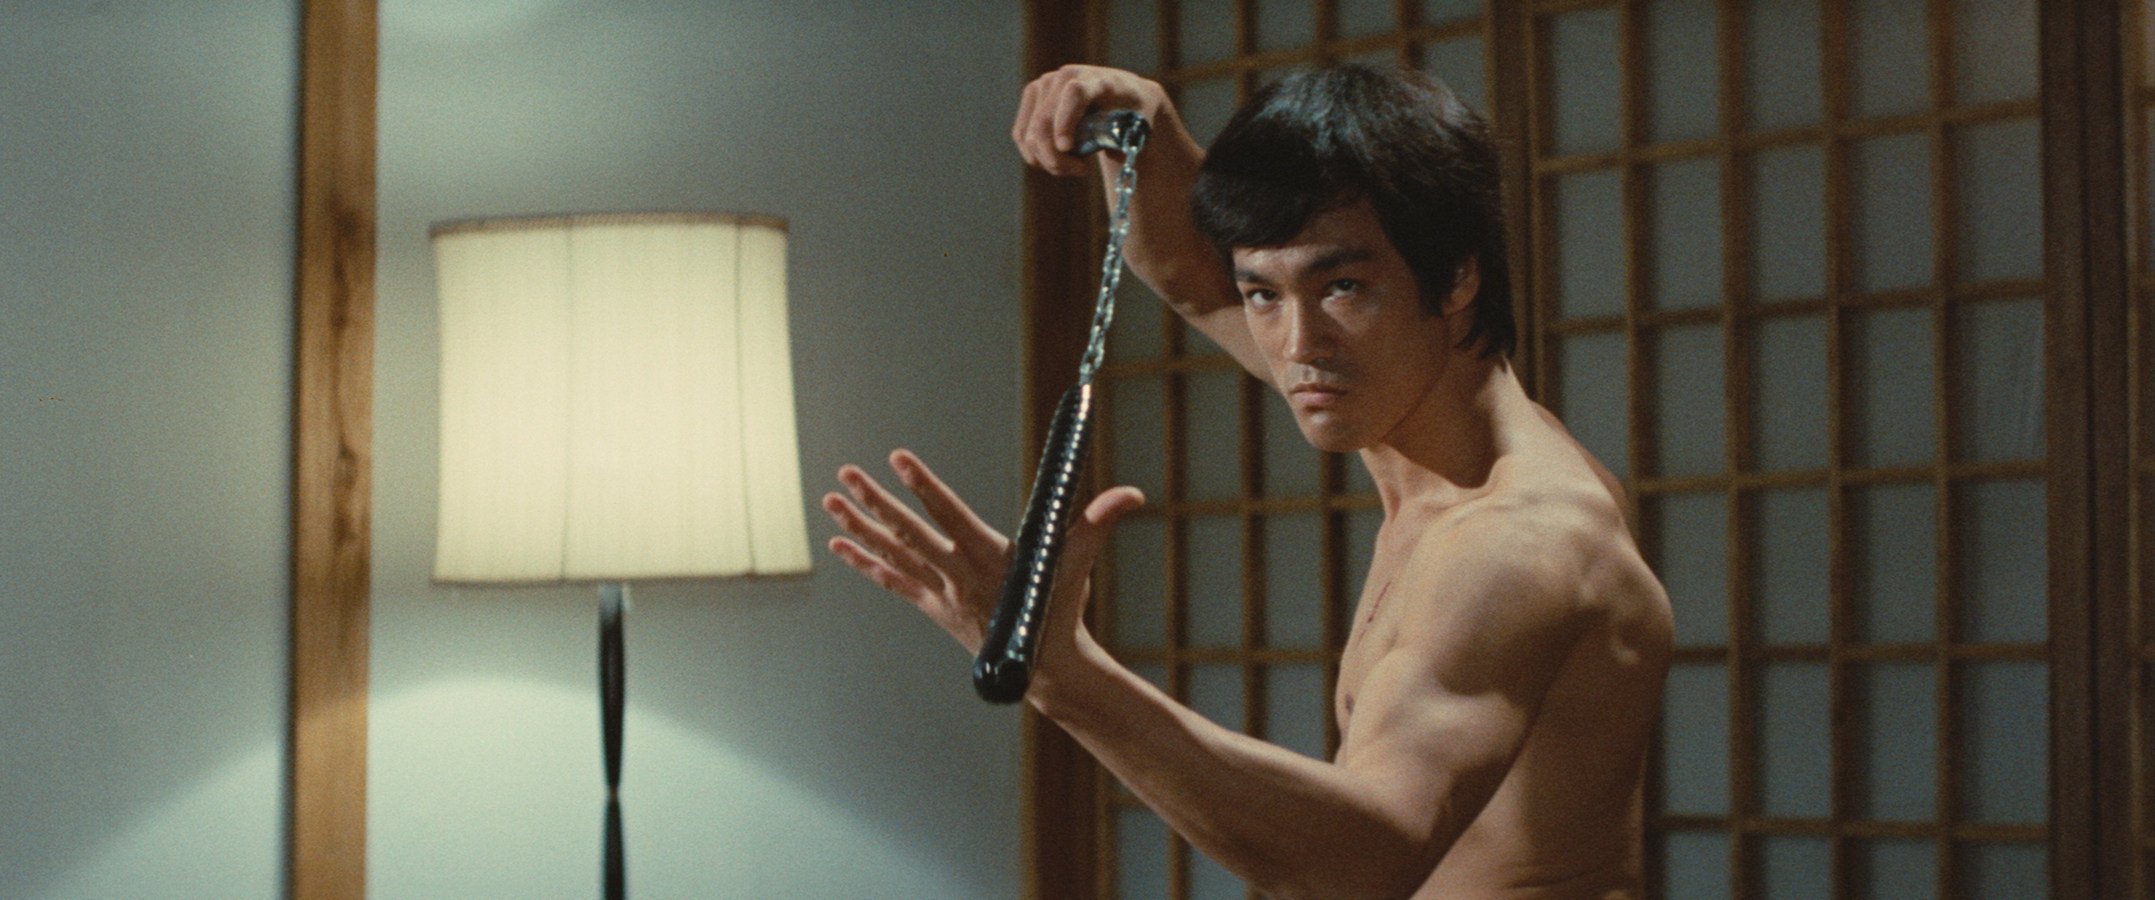 Bruce Lee in a still from Fist of Fury. Photo: Criterion Collection